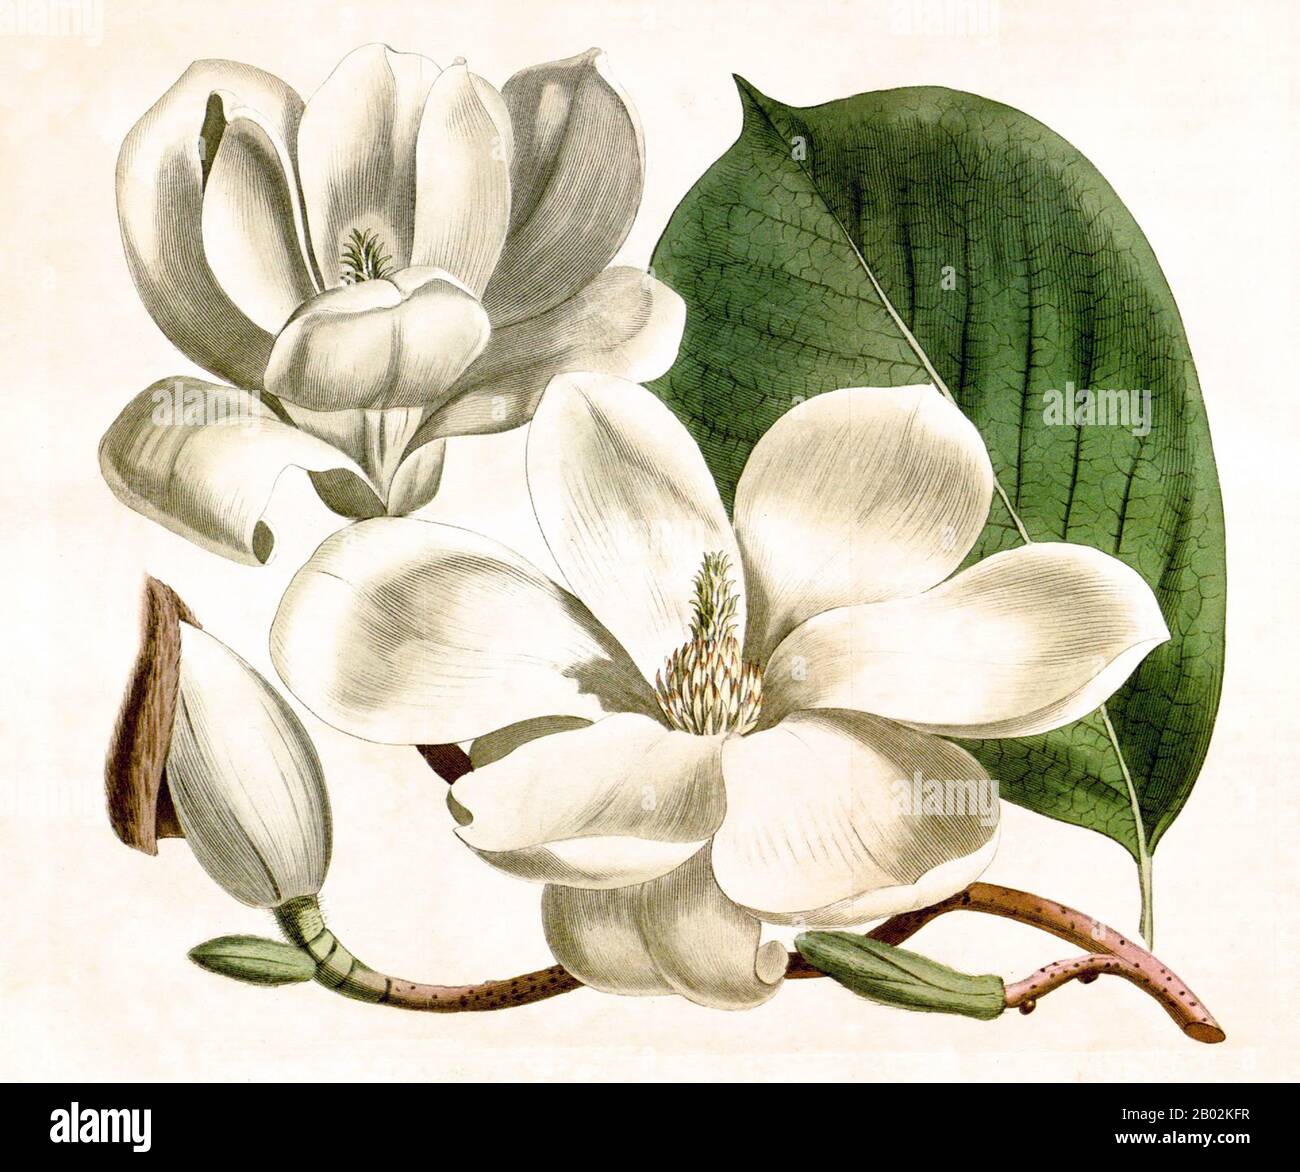 Magnolia denudata, known as the Yulan magnolia (simplified Chinese: 玉兰花; traditional Chinese: 玉蘭花; pinyin: yùlánhuā; literally: 'jade orchid/lily'), is native to central and eastern China.  It has been cultivated in Chinese Buddhist temple gardens since 600 CE. Its flowers were regarded as a symbol of purity in the Tang Dynasty and it was planted in the grounds of the Emperor's palace. It is the official city flower of Shanghai.  Magnolia denudata is a rather low, rounded, thickly branched, and coarse-textured tree to 30 feet (9.1 m) tall. The leaves are ovate, bright green, 15 cm long and 8 c Stock Photo